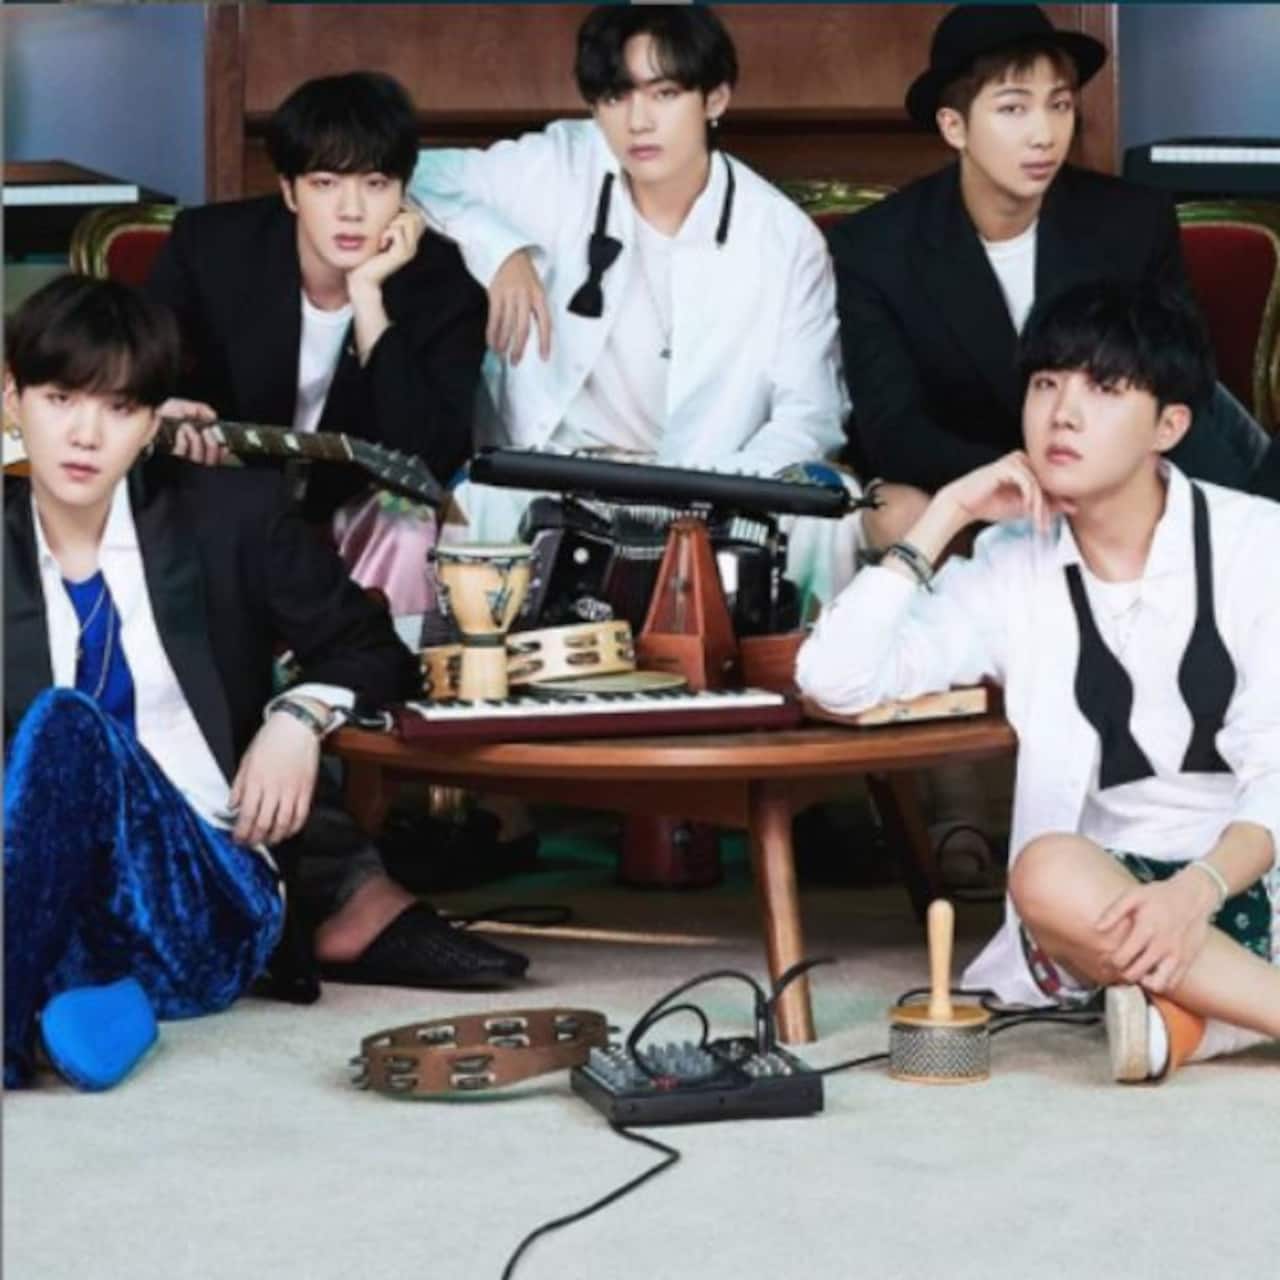 K-pop band BTS announces the title song of upcoming album